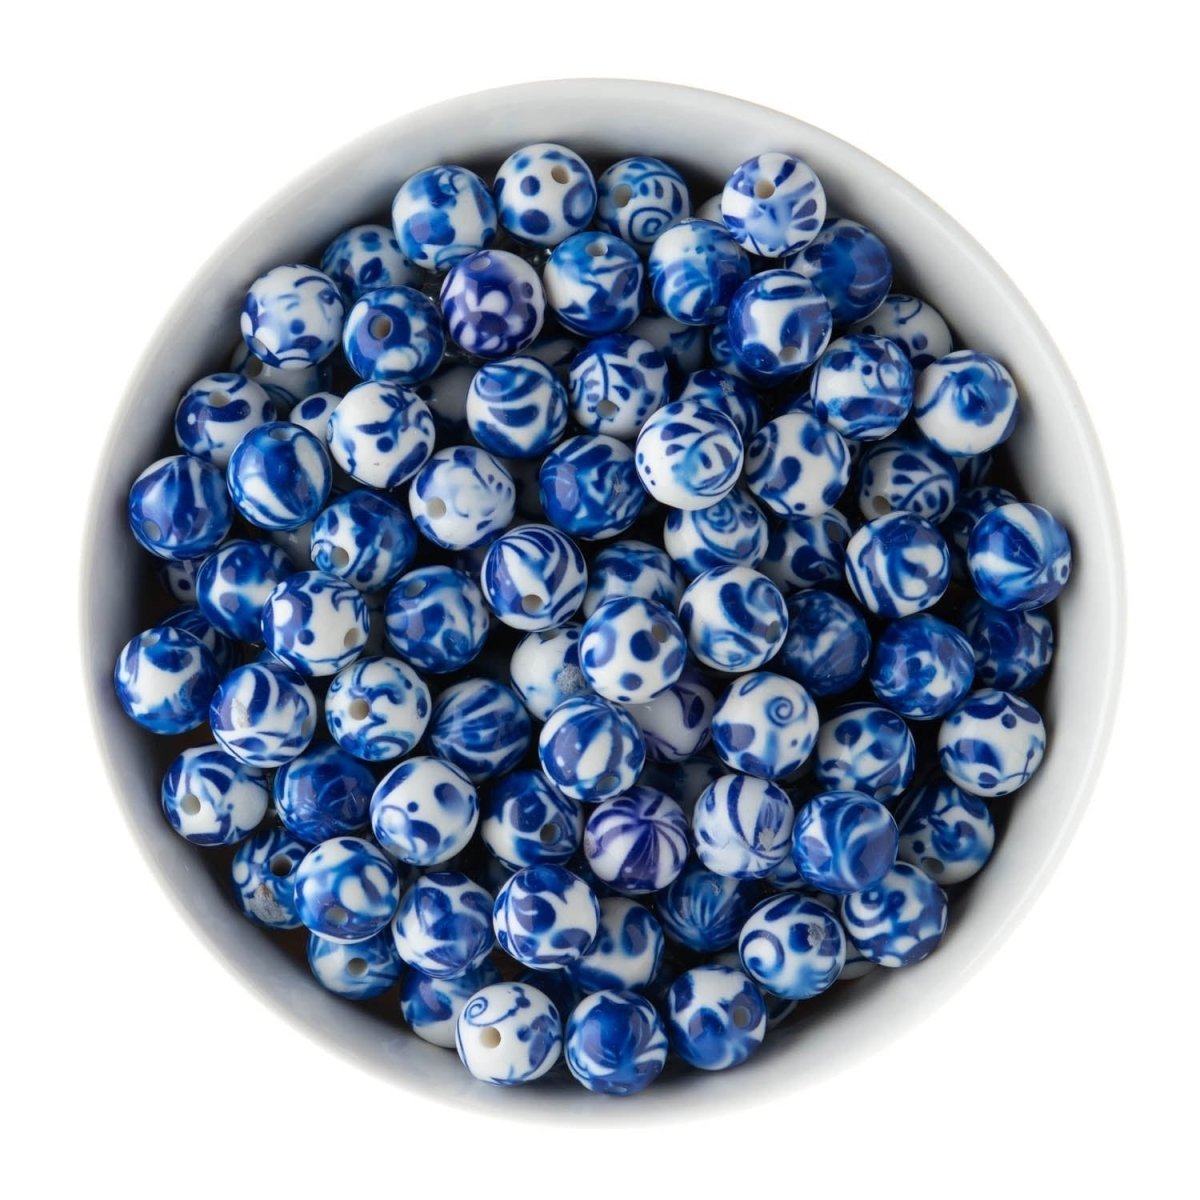 Acrylic Round Beads Delft Blue 12mm from Cara & Co Craft Supply